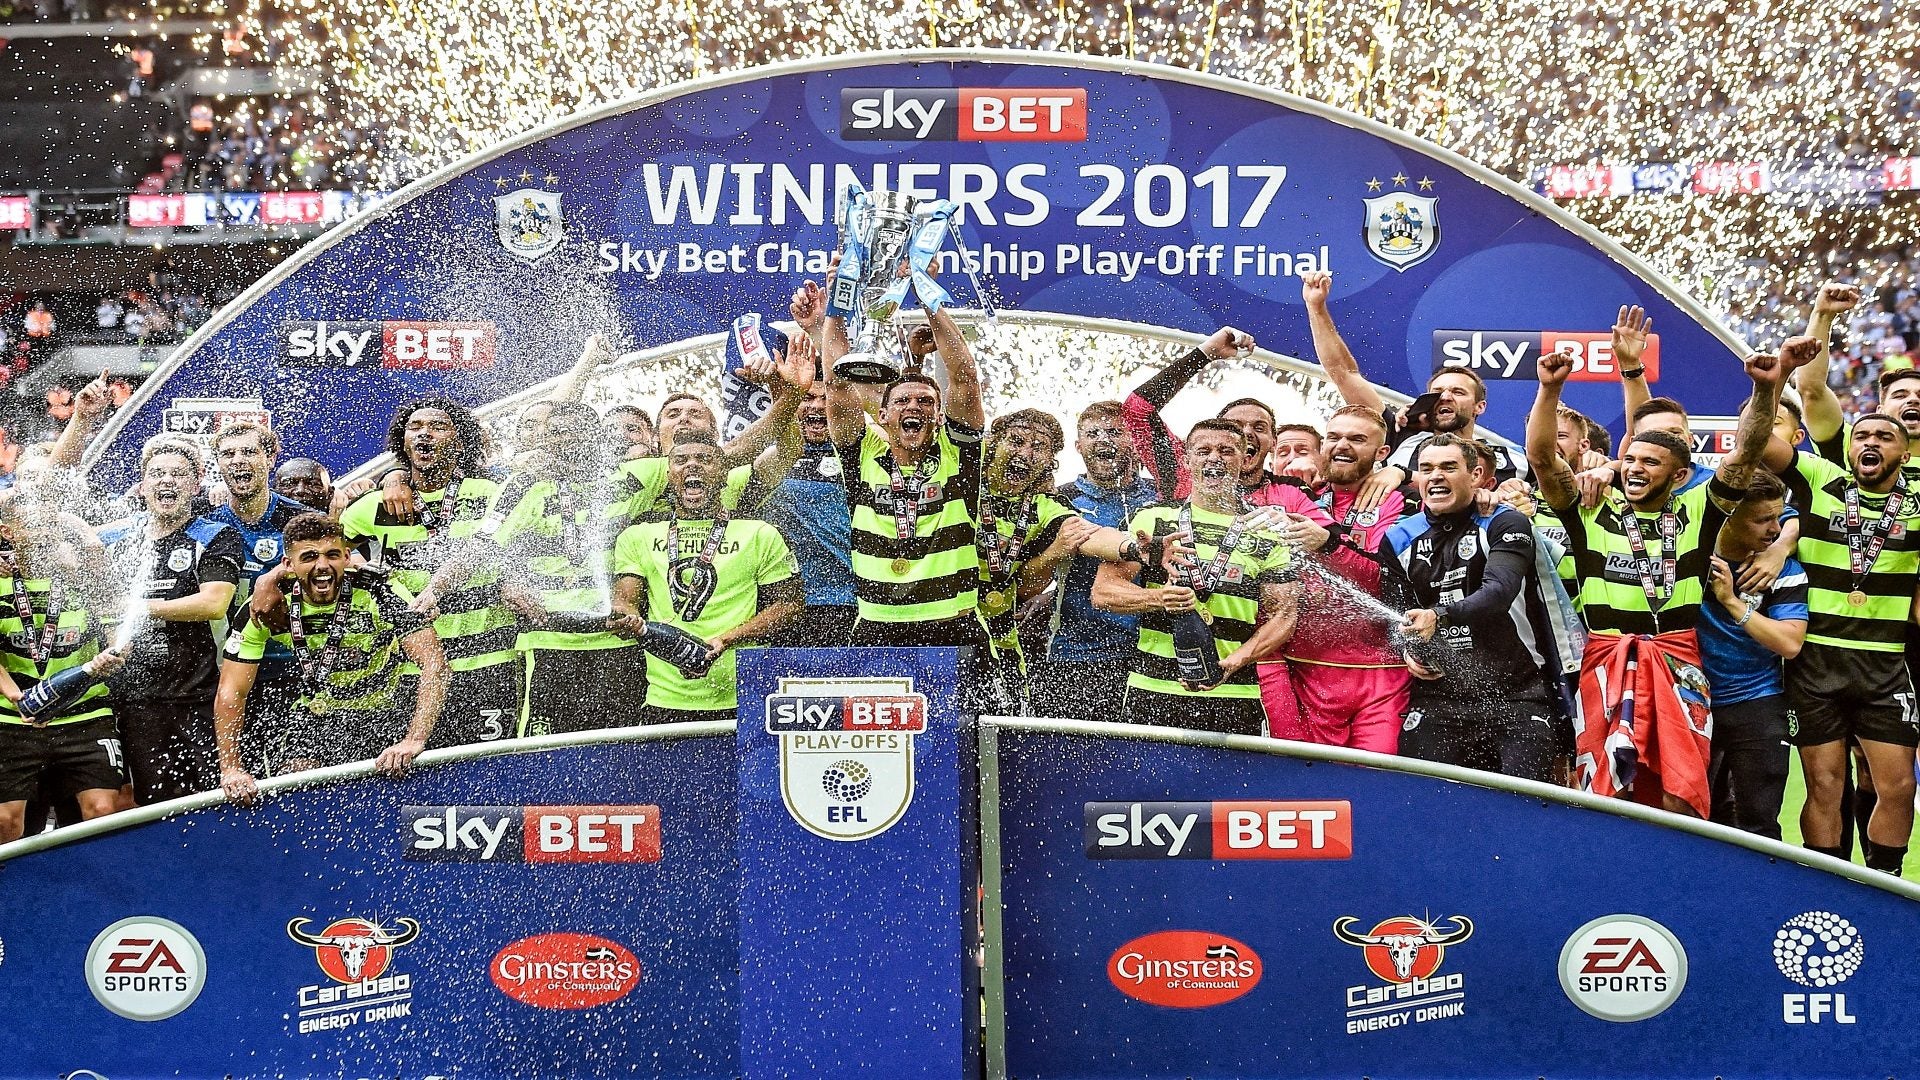 Sky claims victory in UK over illegal pirate football streams Trusted